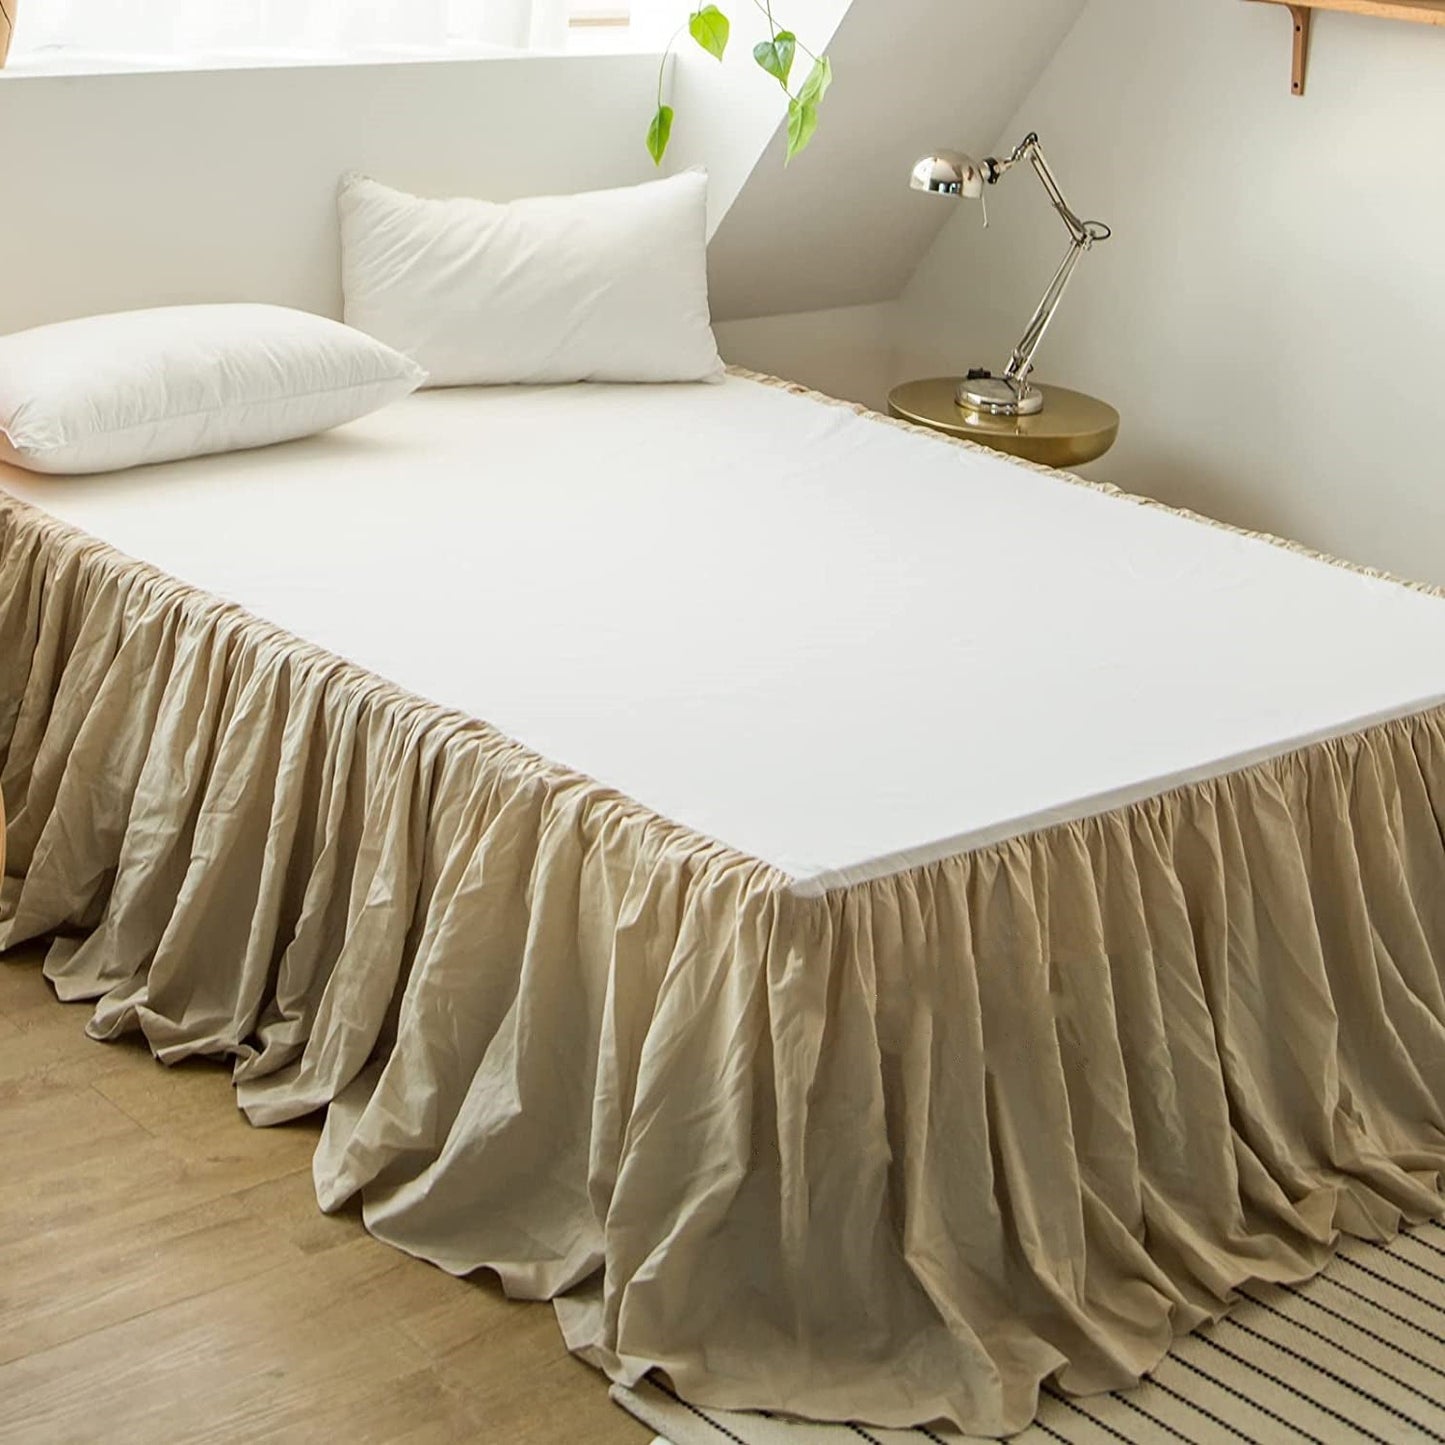 WONGS BEDDING Natural Flax Cotton French Linen Bed Skirt